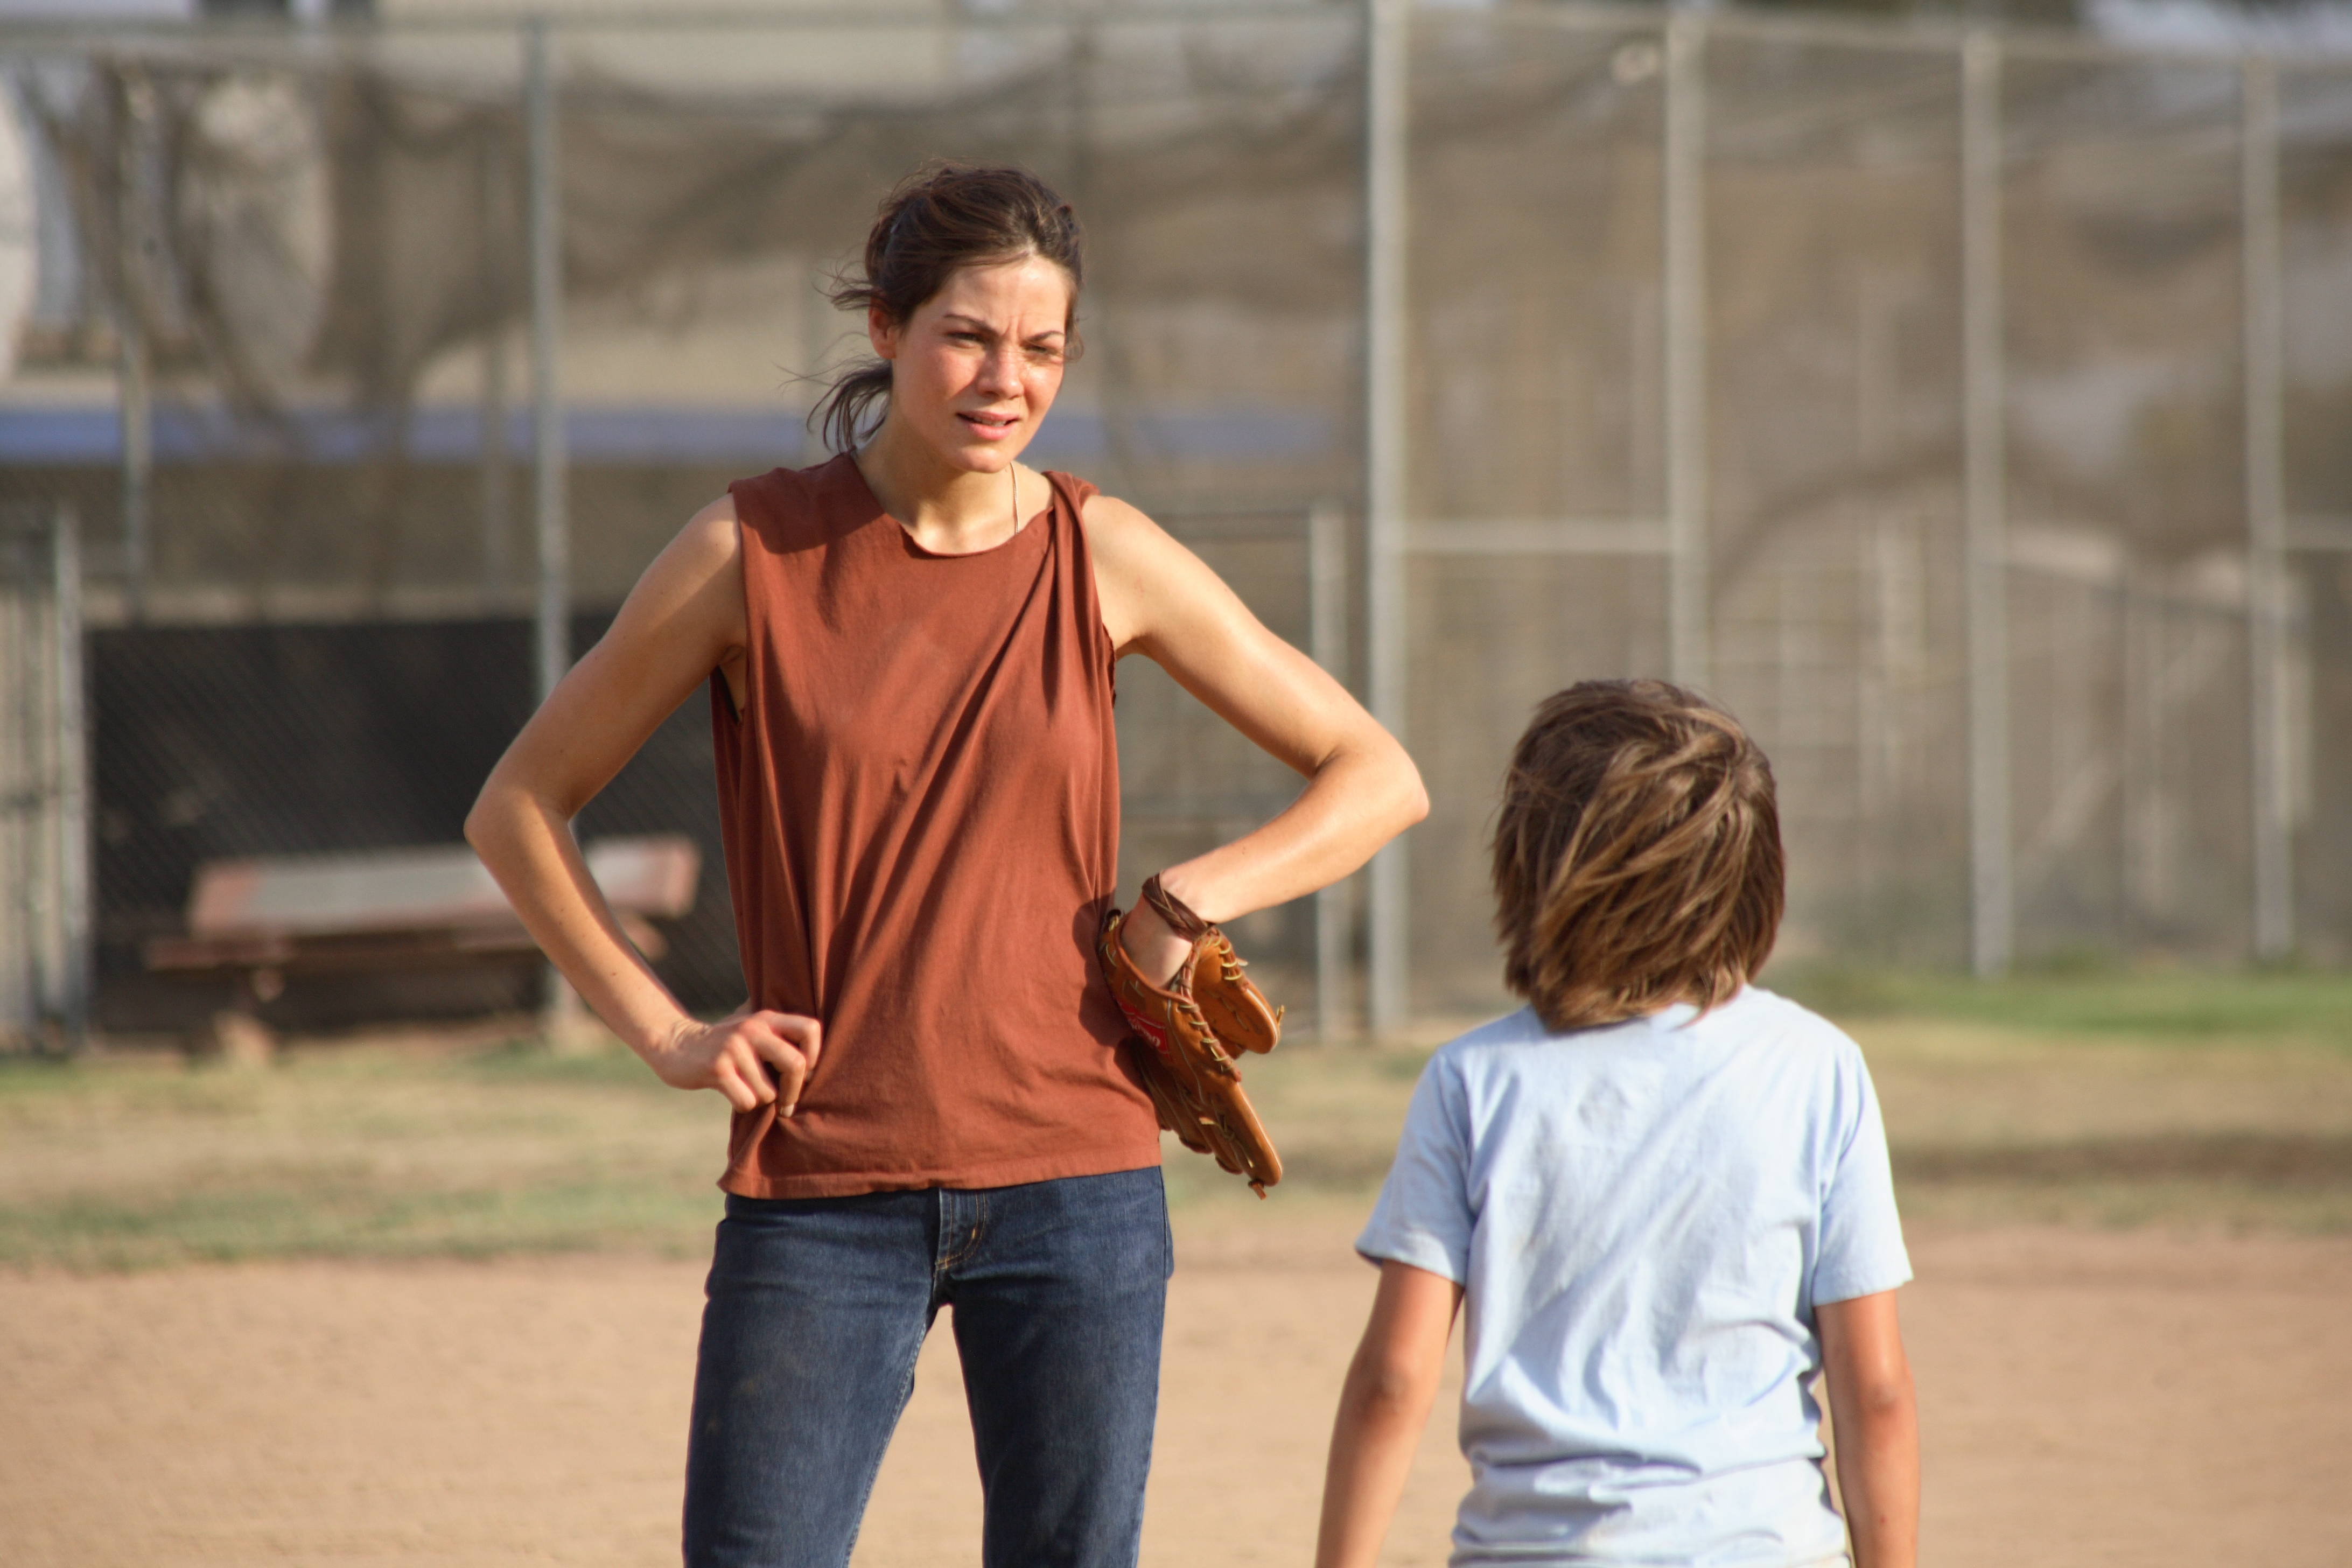 Michelle Monaghan as Diane Ford and Jimmy Bennet as her son, Peter, in TRUCKER.